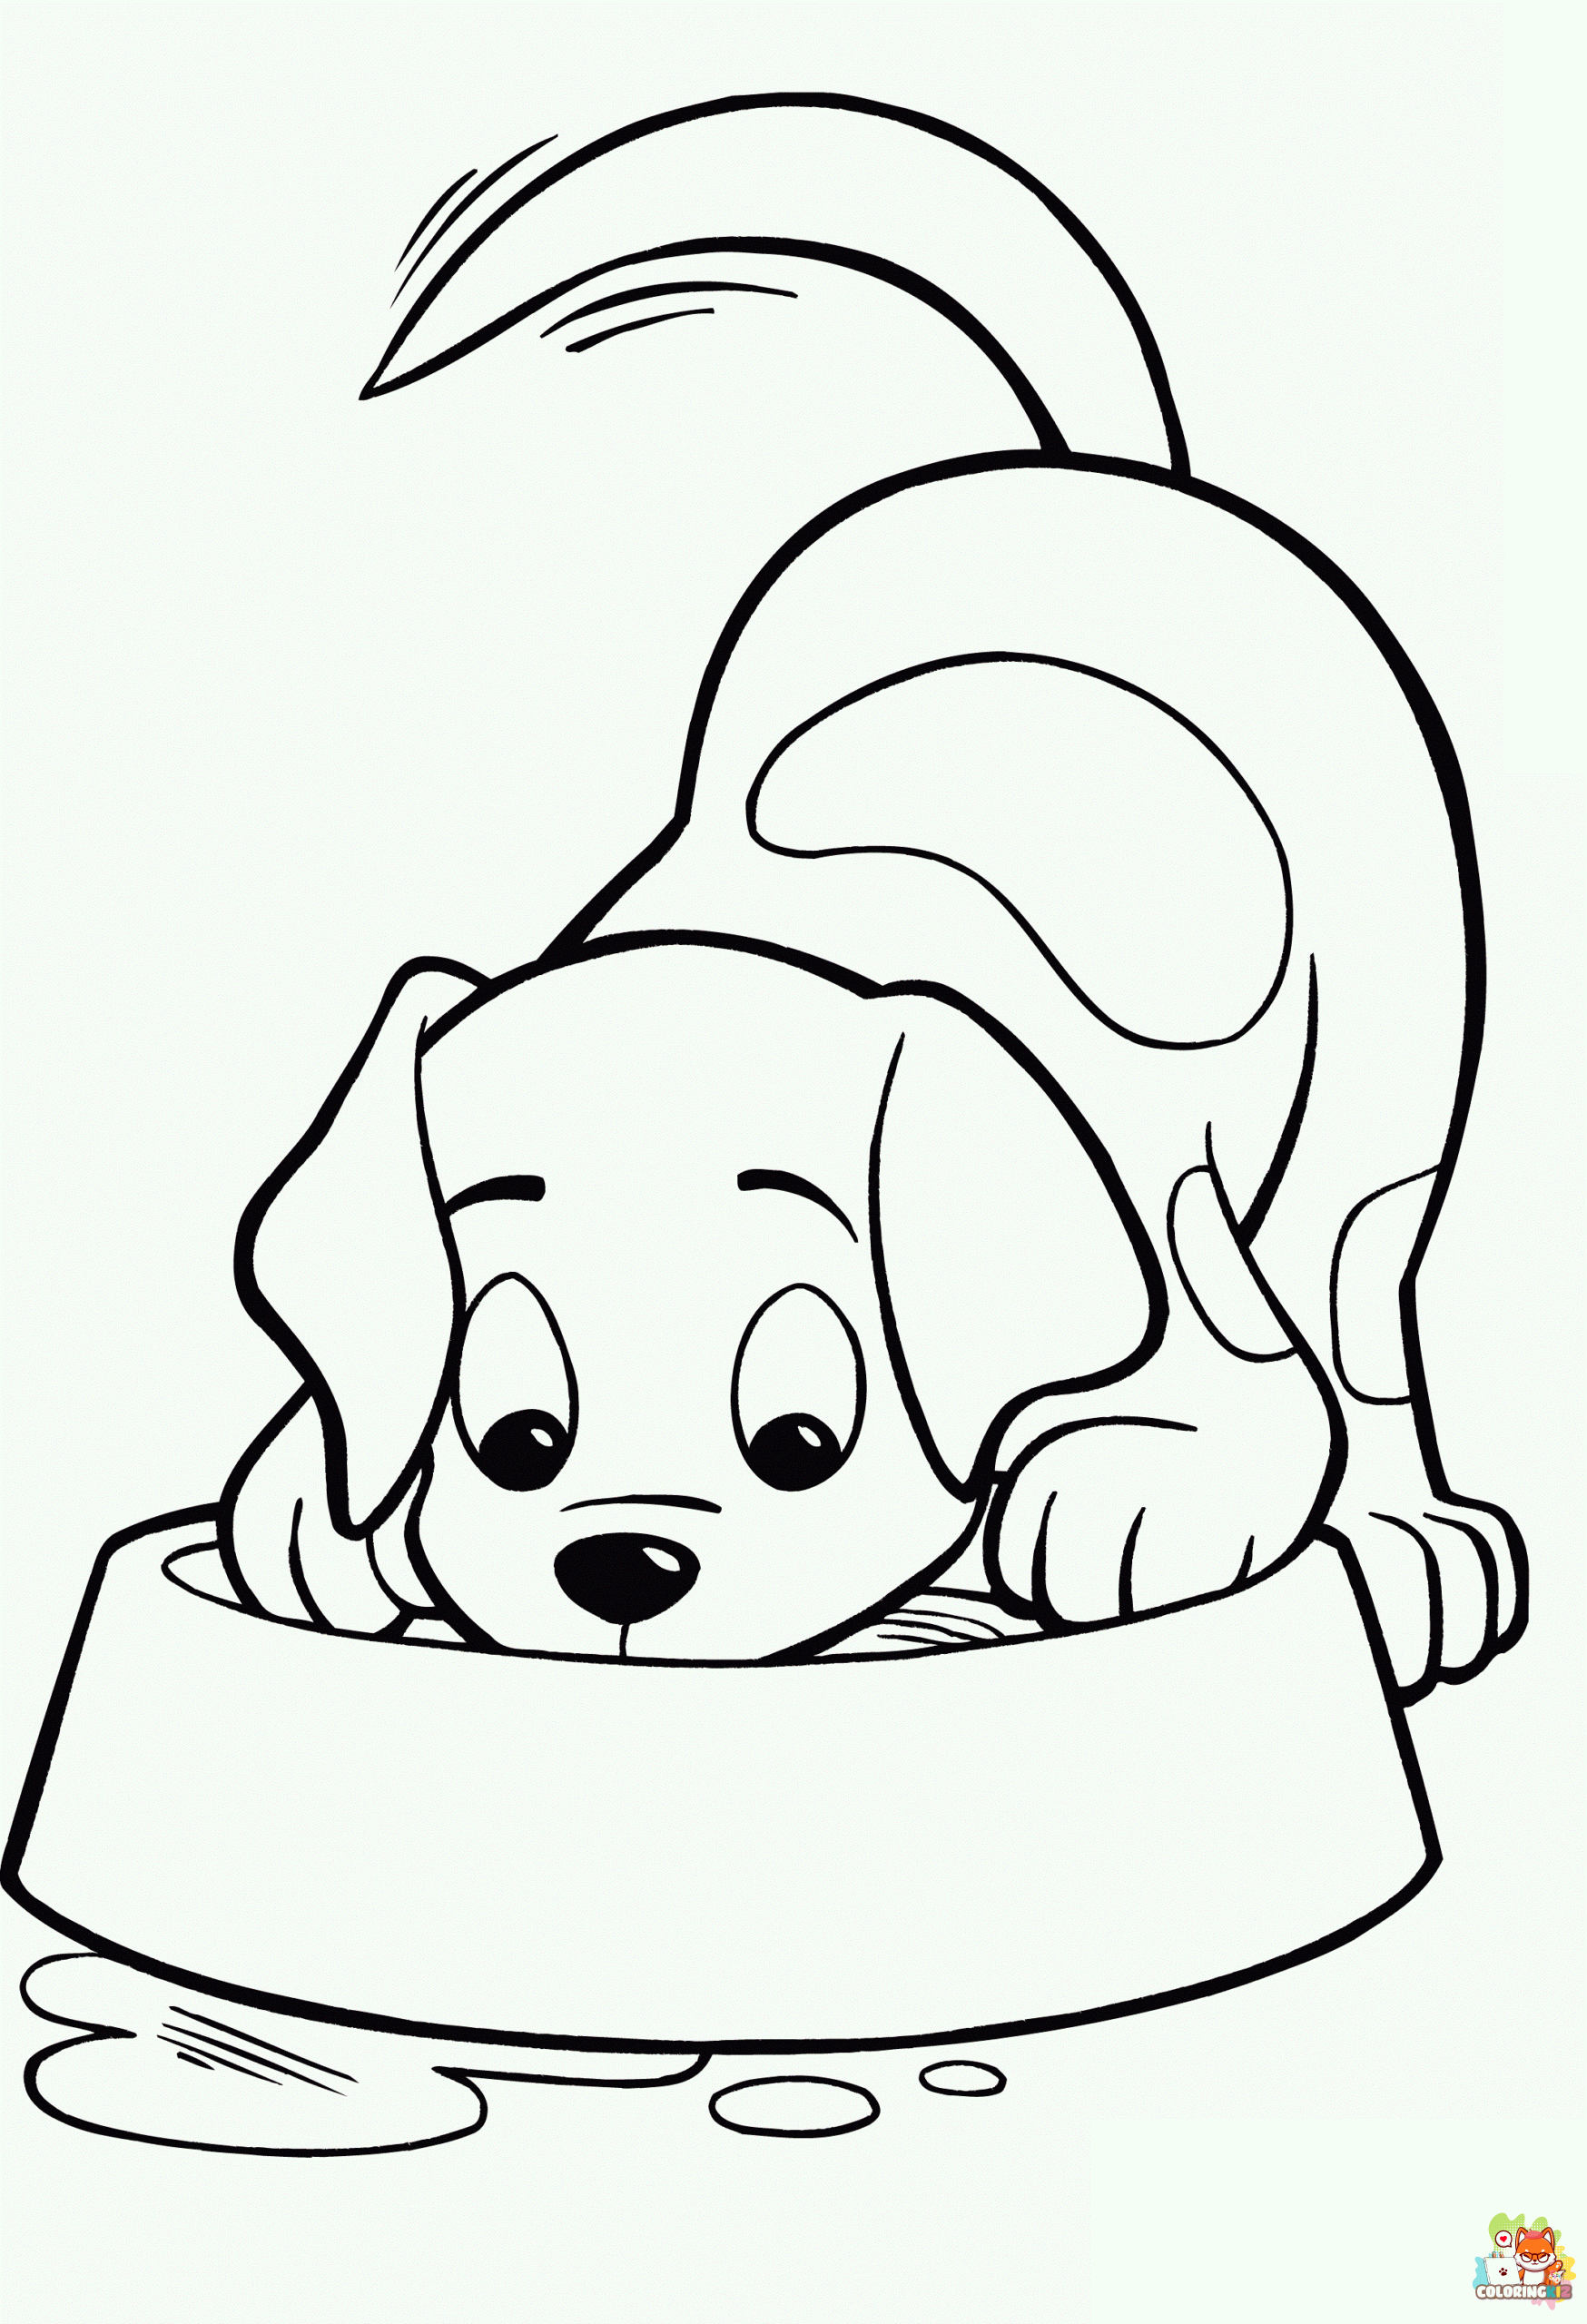 Cinna Puppy Coloring Pages 1